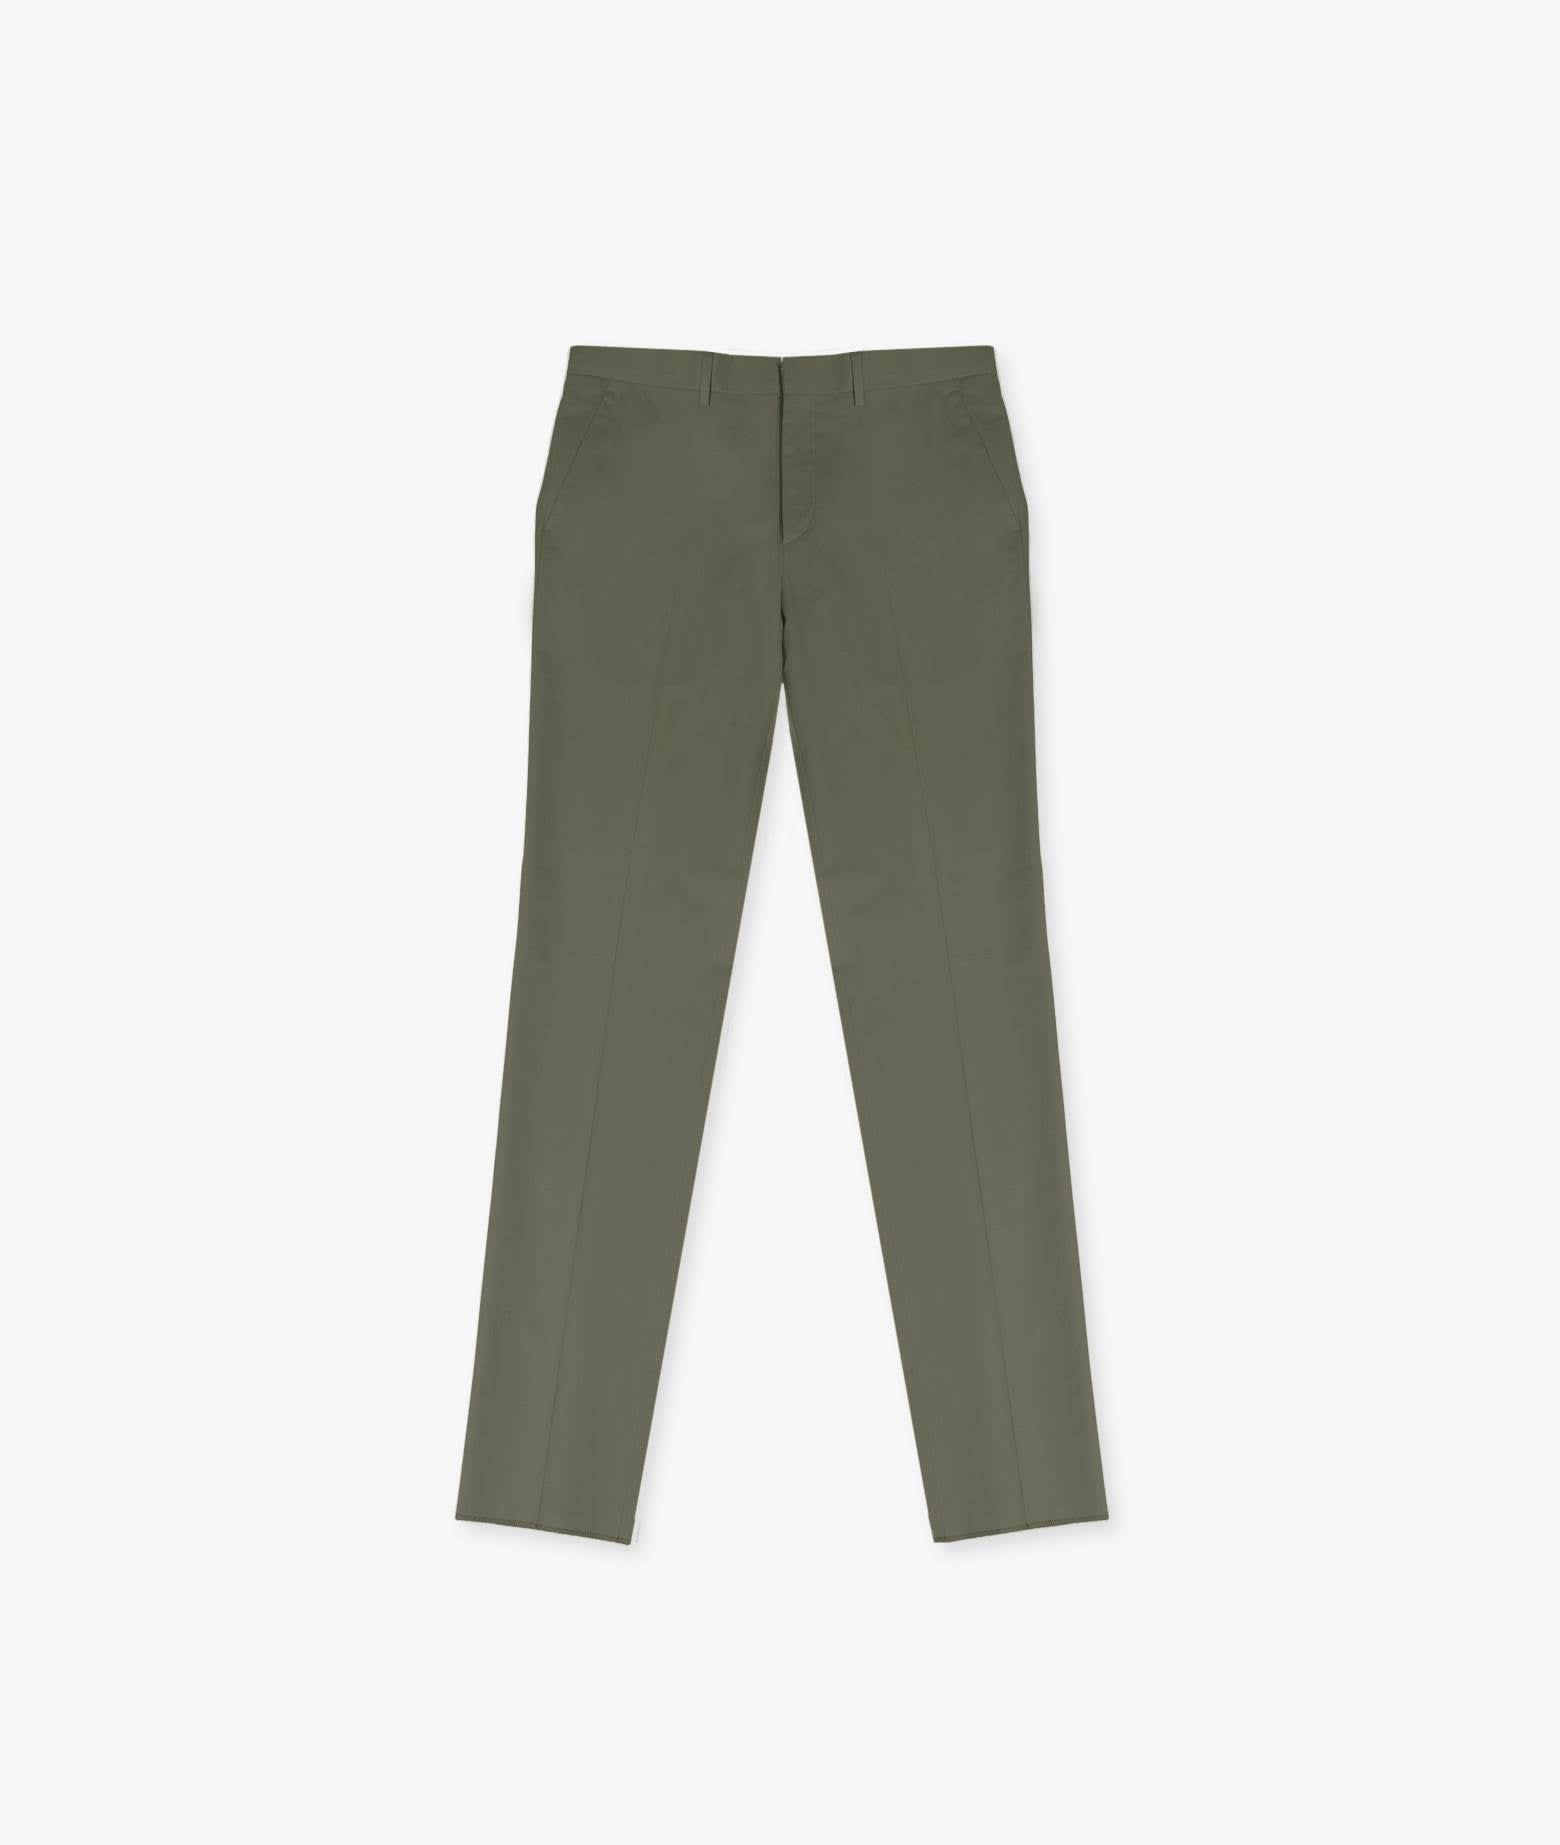 Larusmiani Chino Sport Trousers Pants In Olive